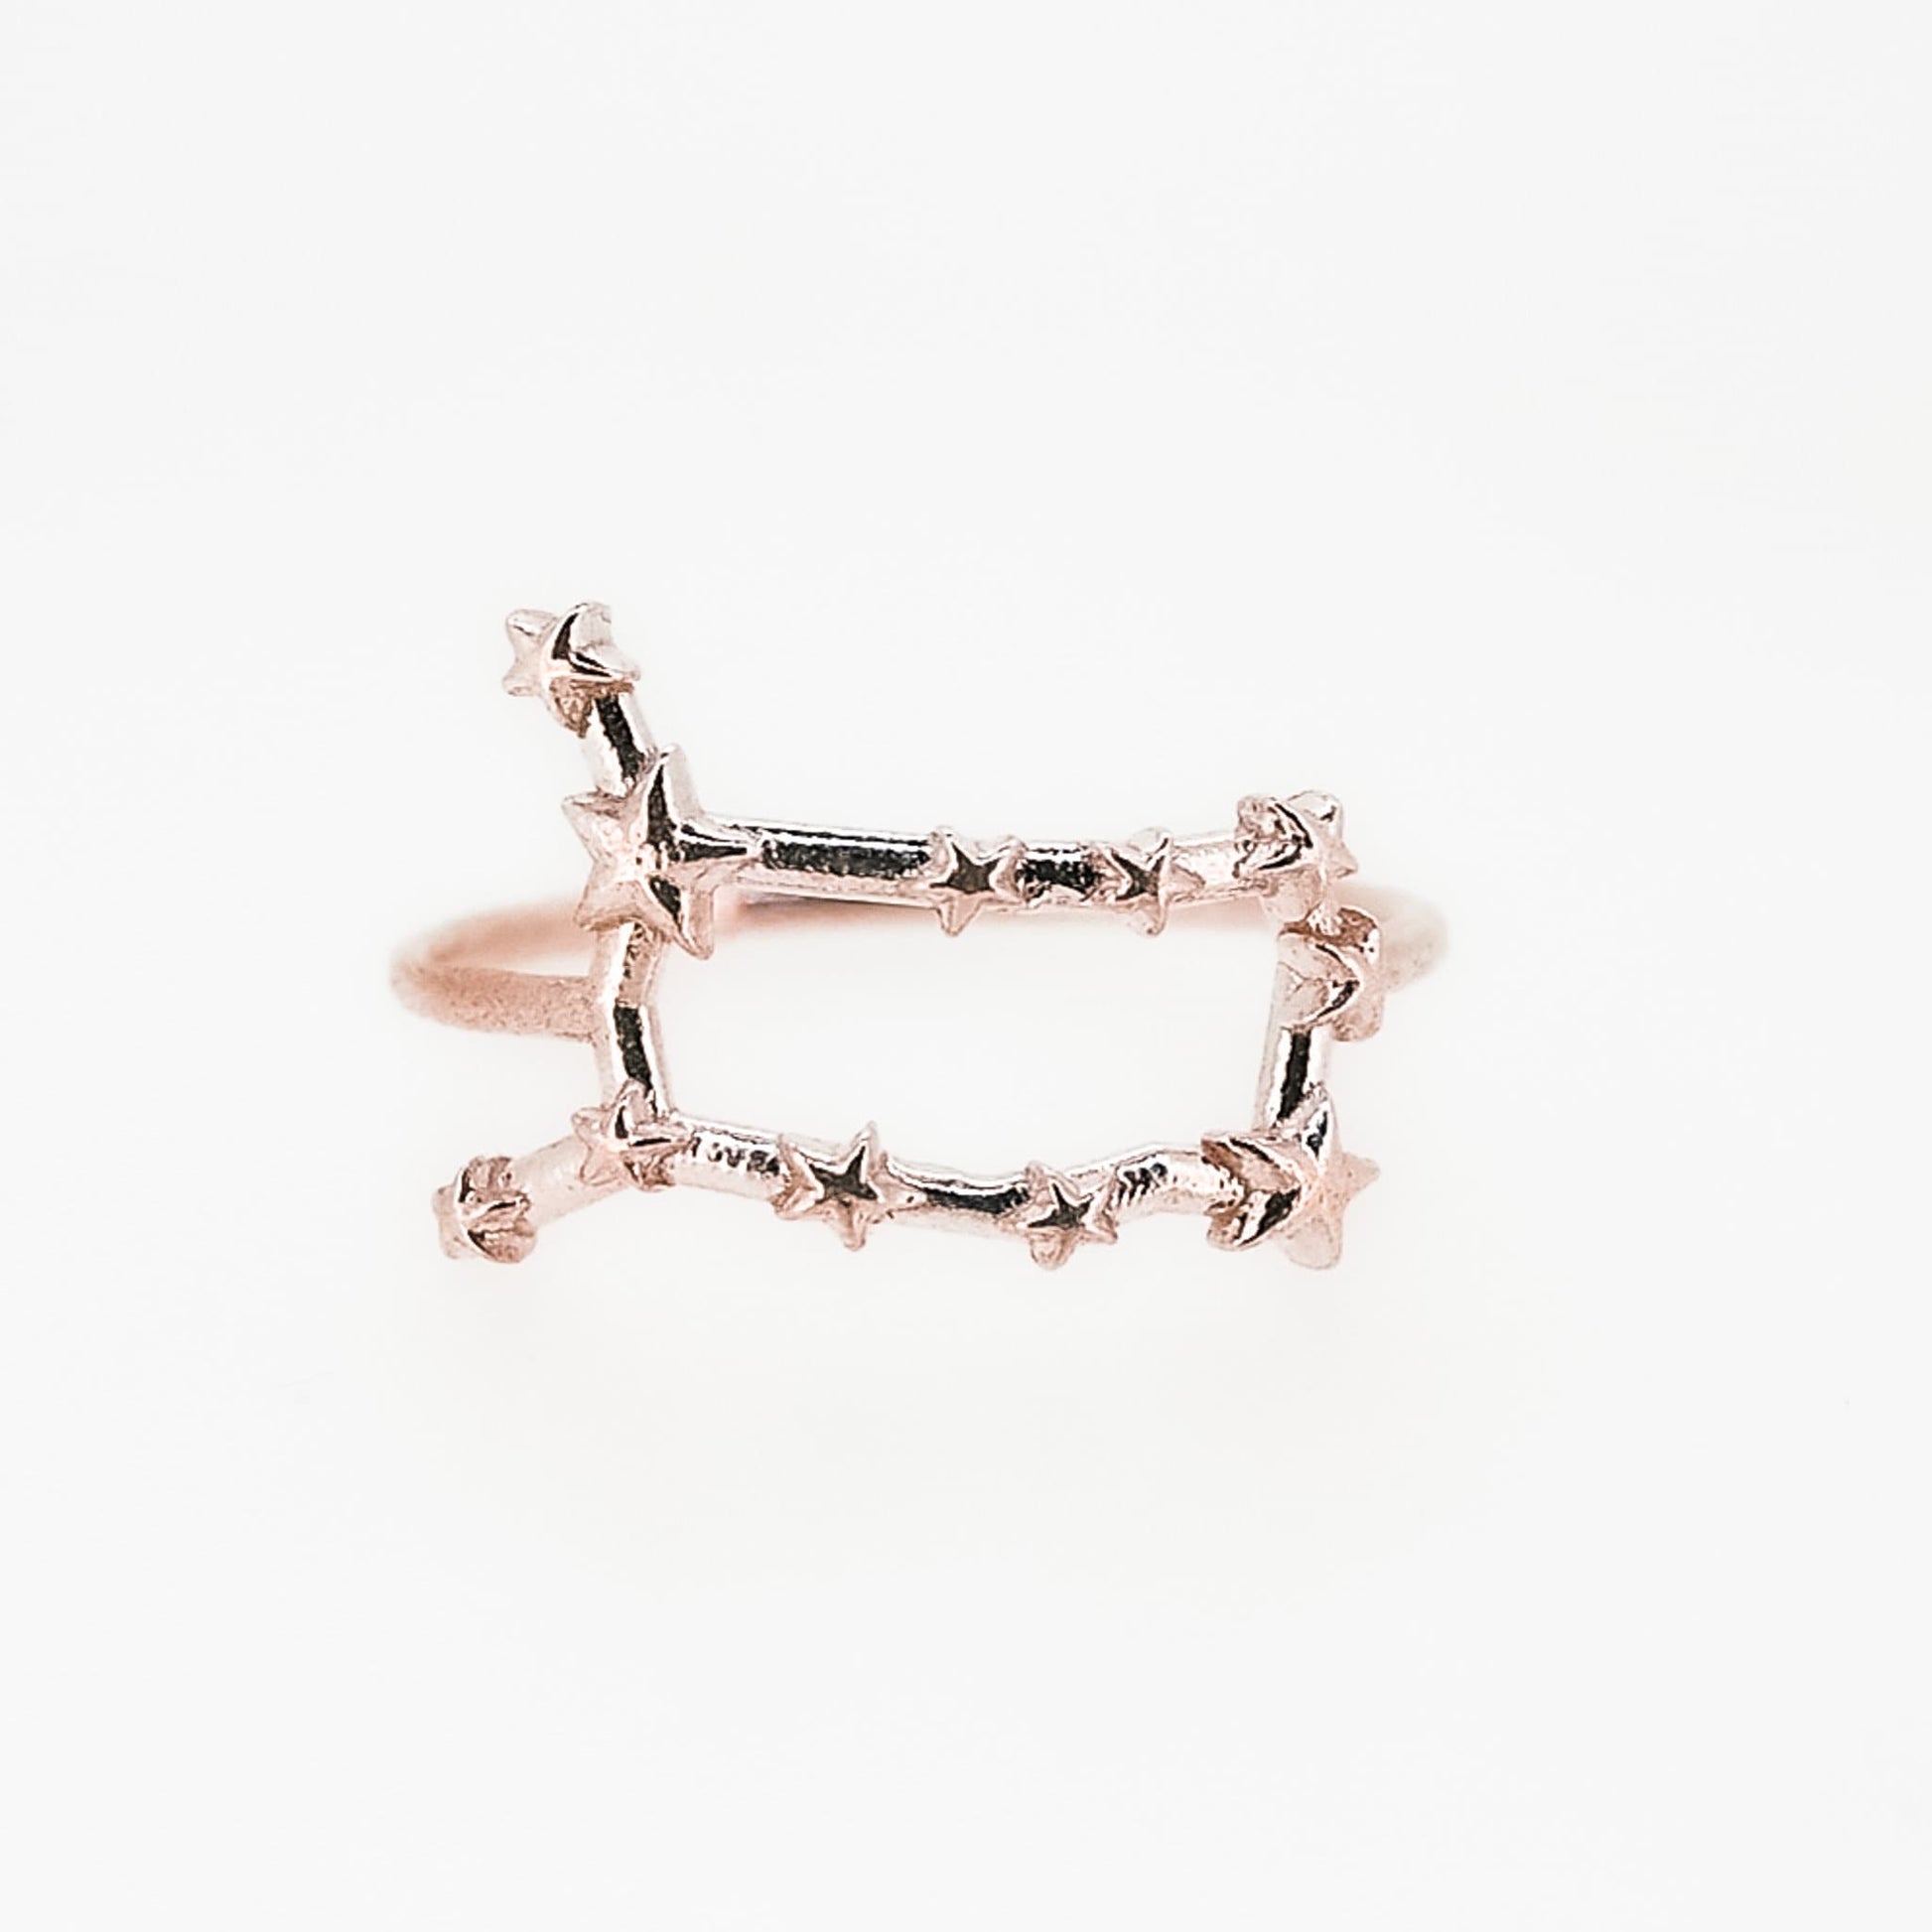 Solid Gold Gemini, Star Sign Dainty Celestial Zodiac Ring in solid 14K Yellow Gold, 14k White Gold, 14K Rose Gold